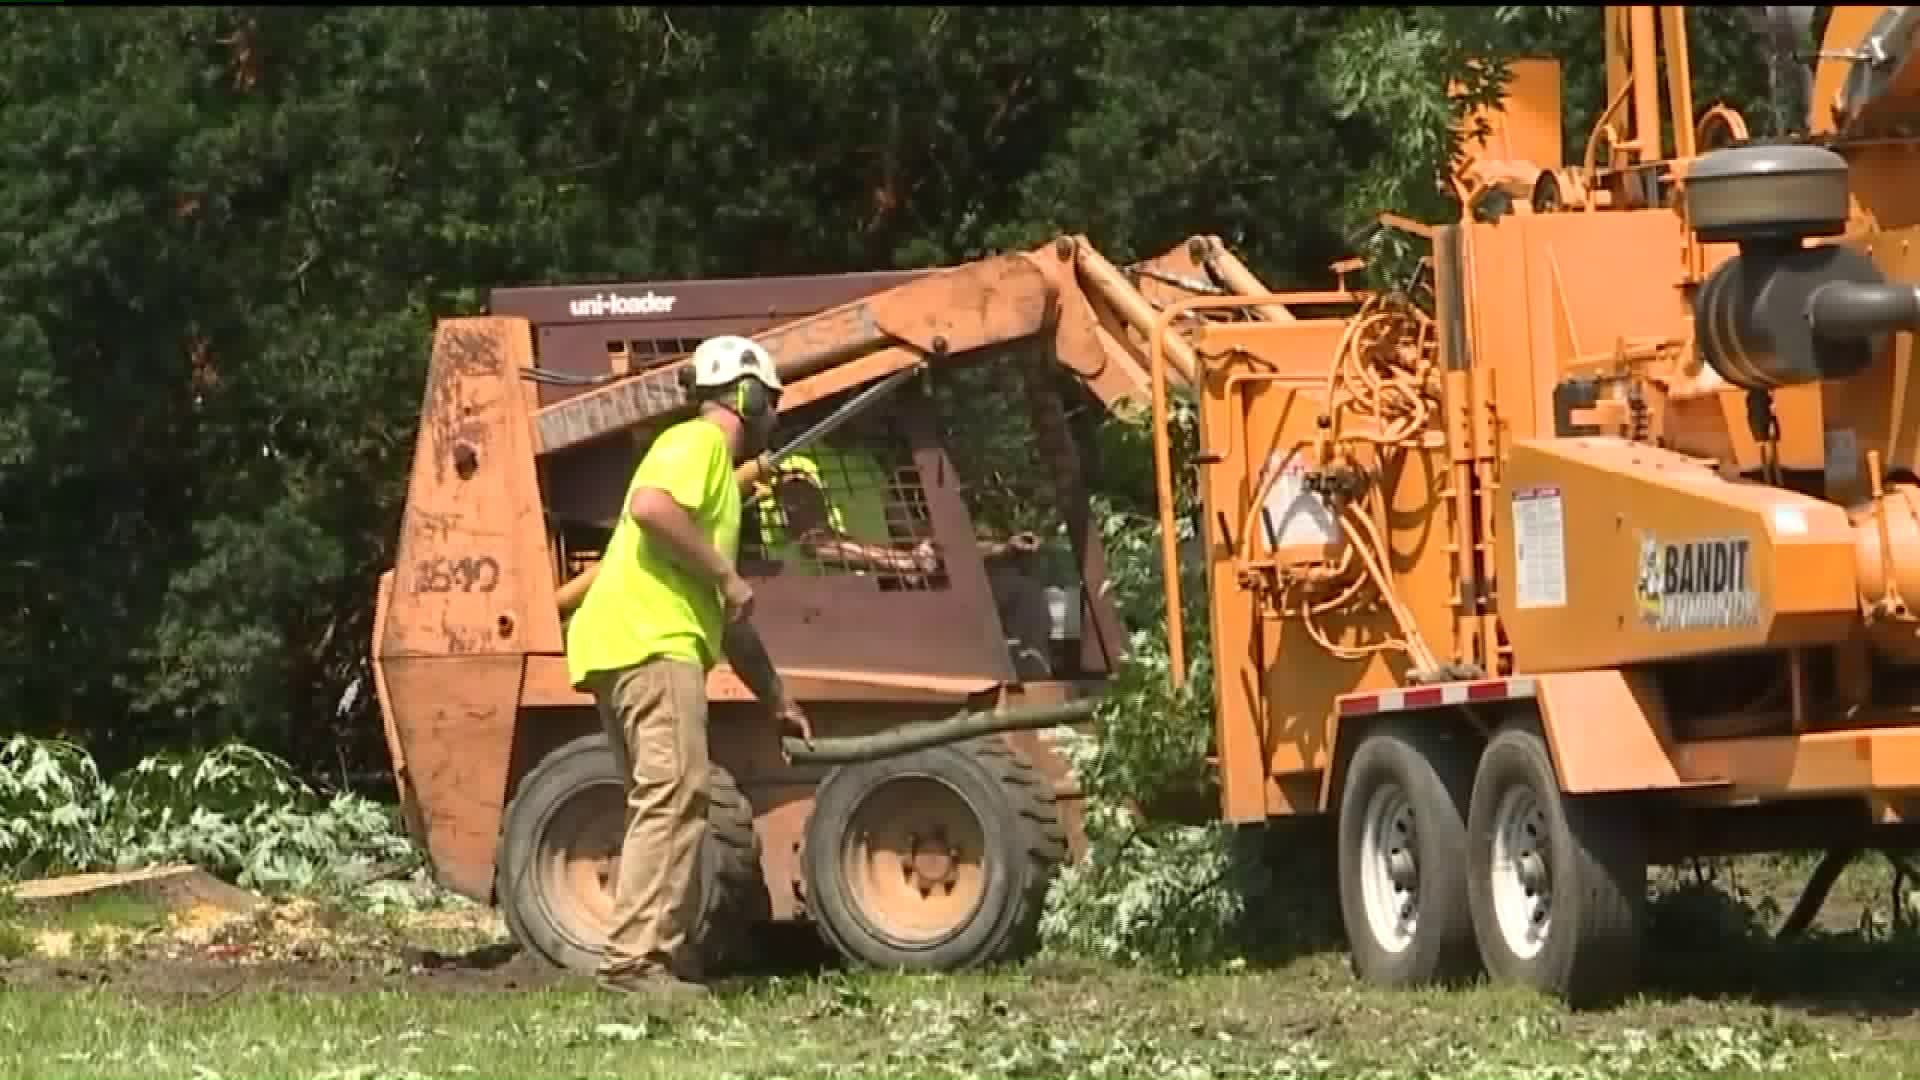 Workers Dealing with the Heat in Northumberland County